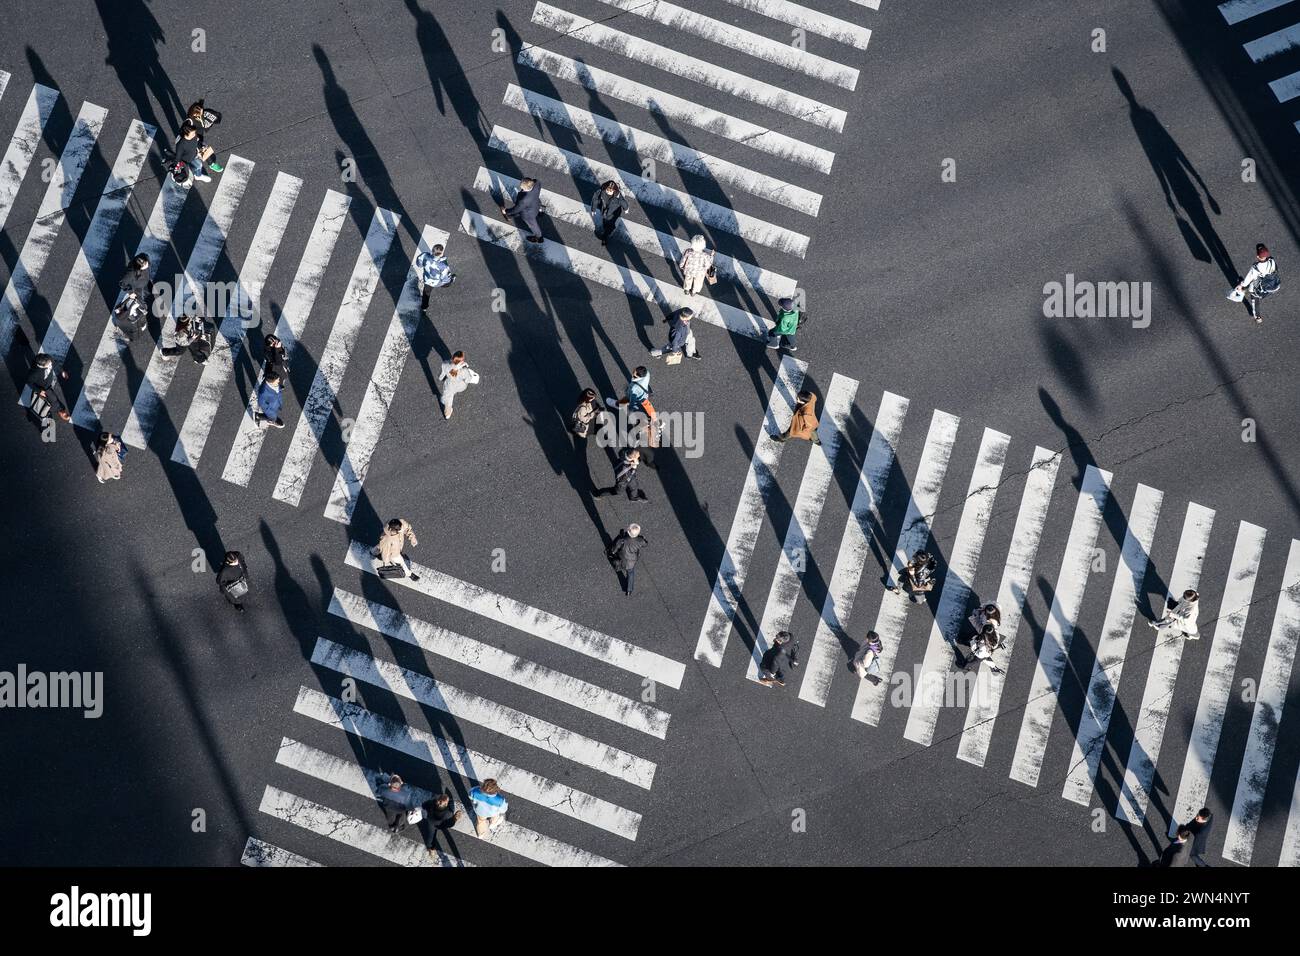 Pedestrians crossing the street at a busy intersection in Ginza, a popular upscale shopping area of Tokyo, Japan. Stock Photo